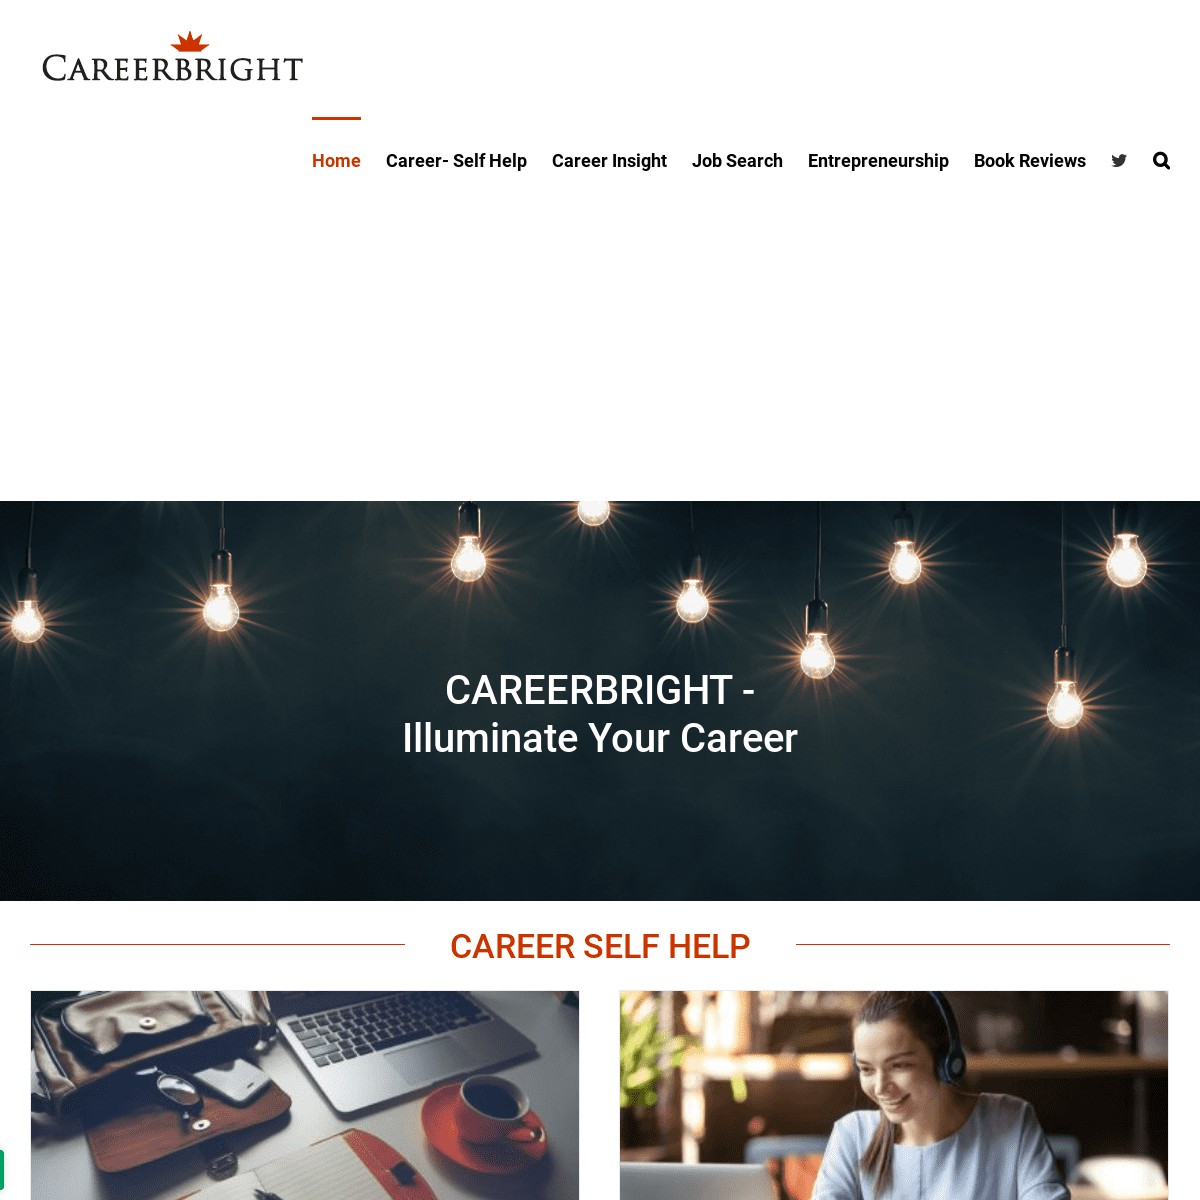 A complete backup of careerbright.com